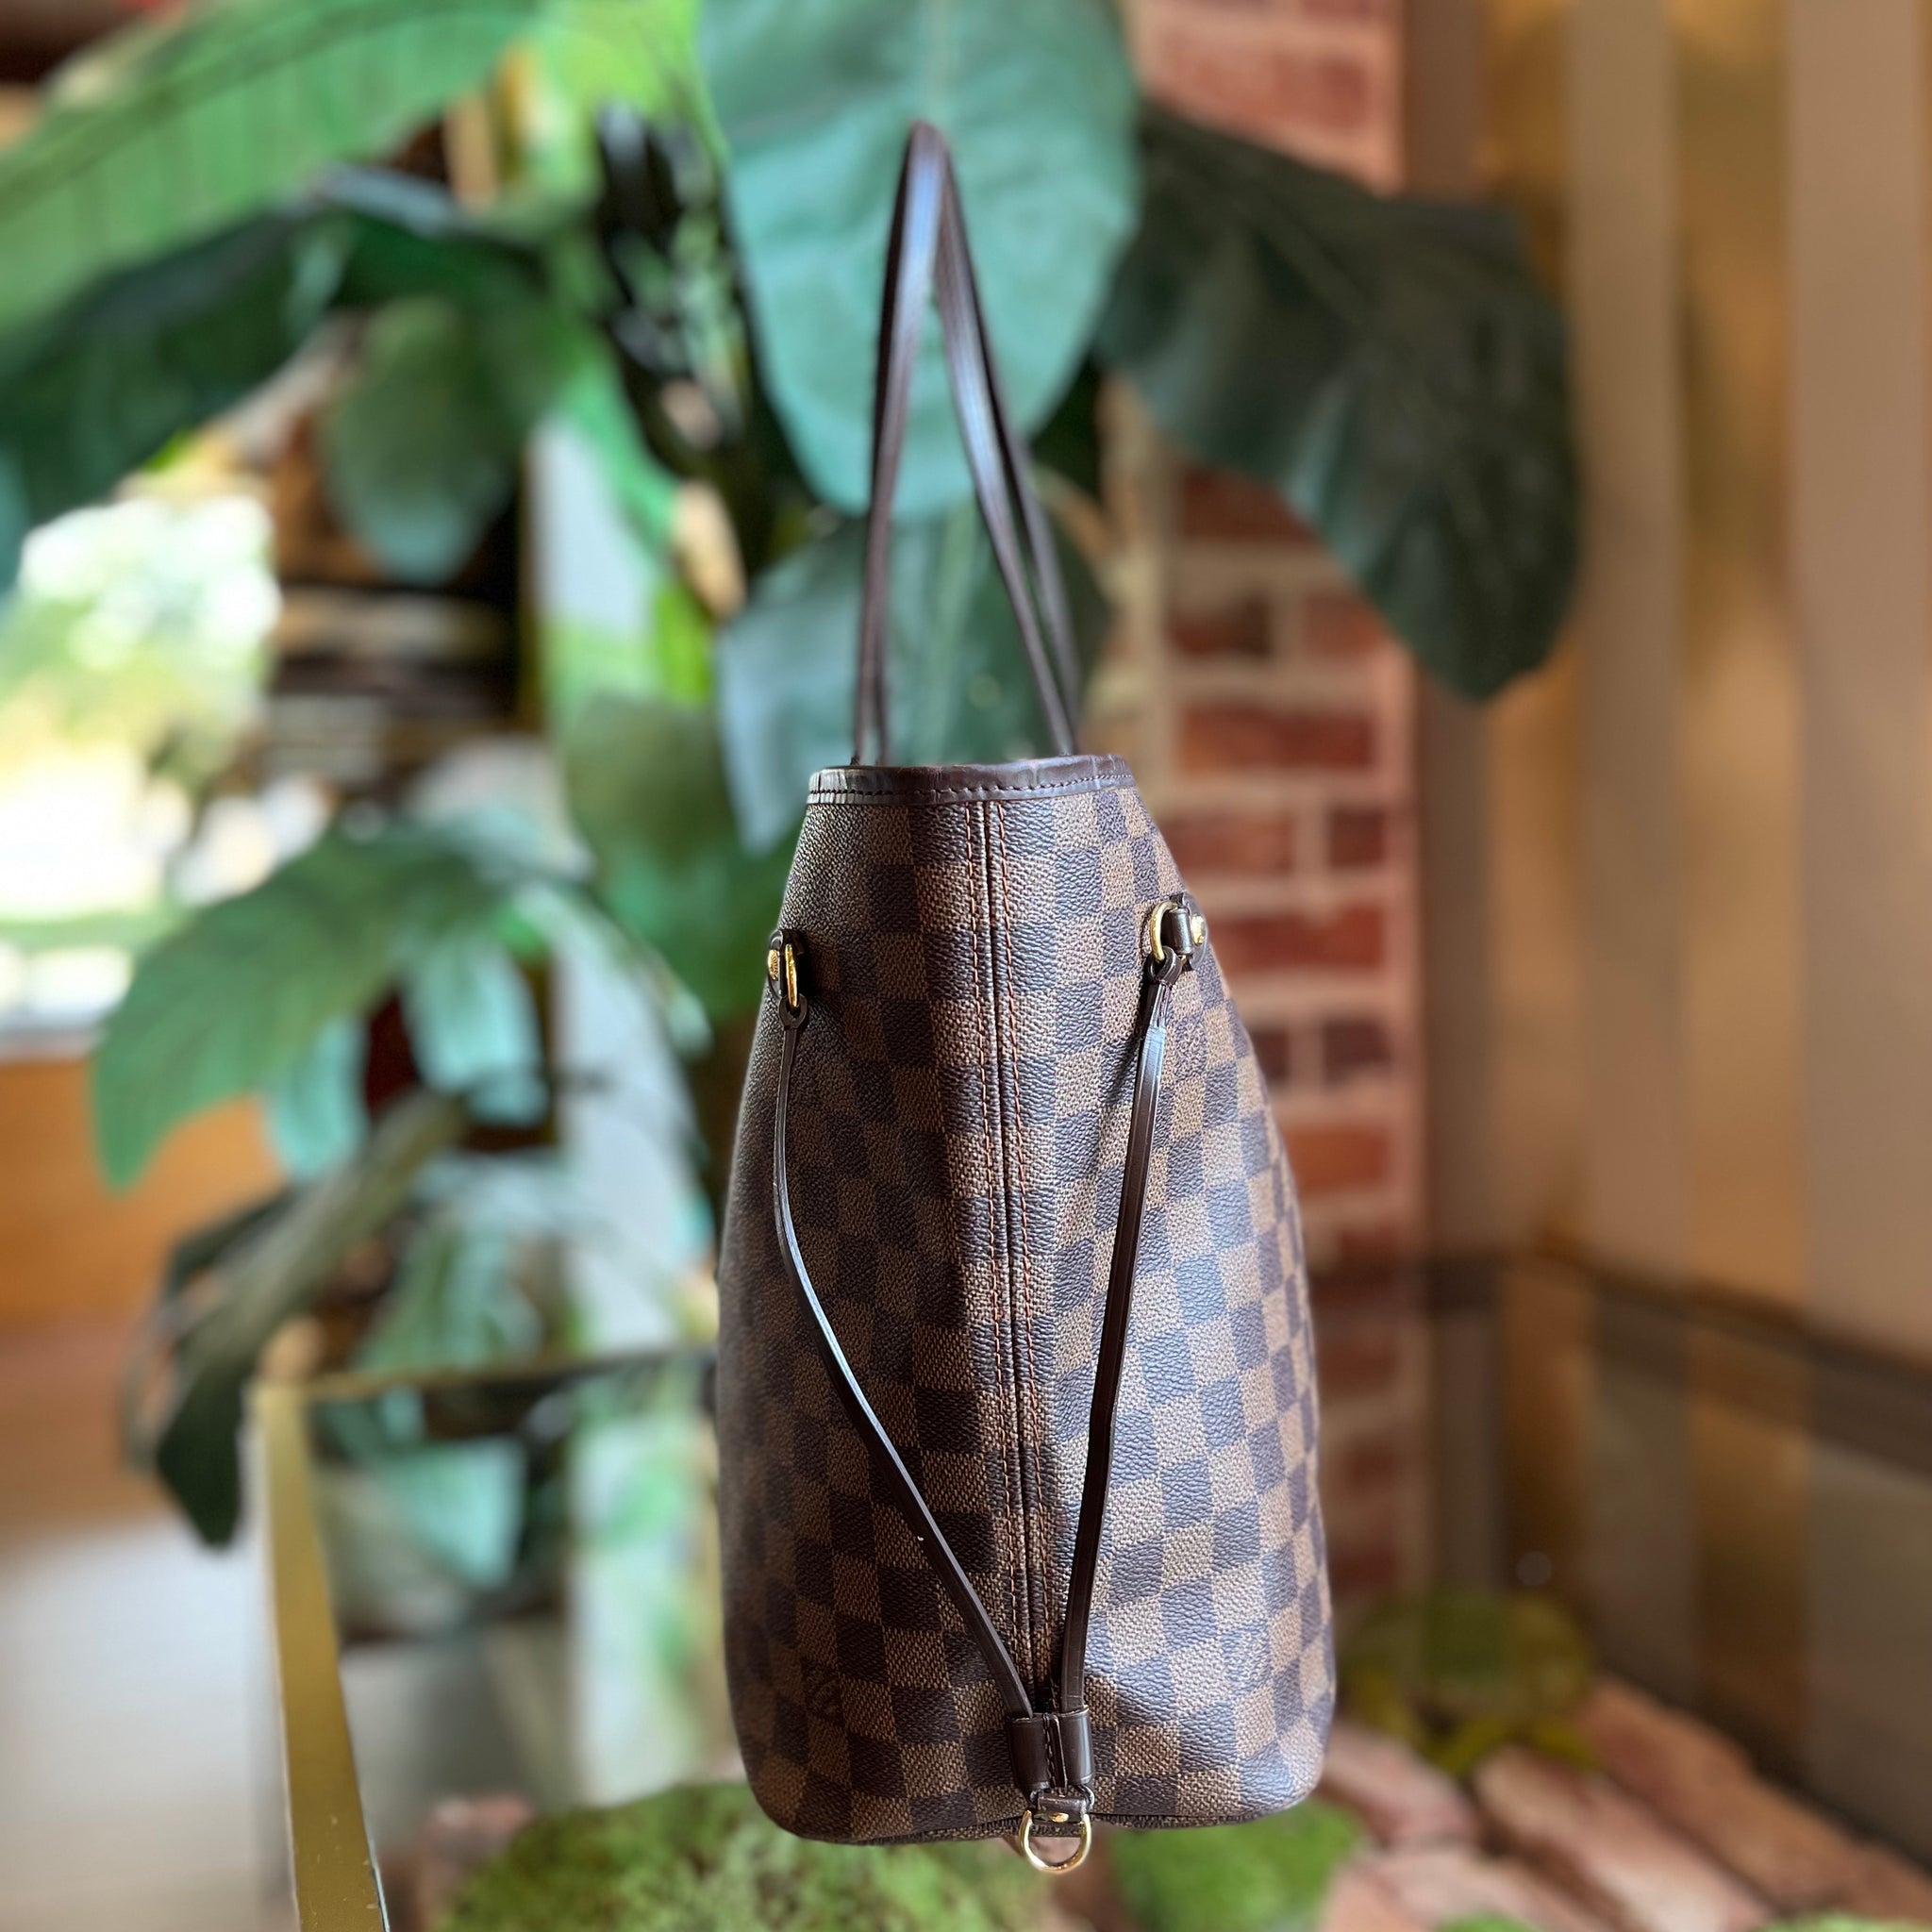 Louis Vuitton Neverfull mm Tote in Damier Ebene Canvas N41358